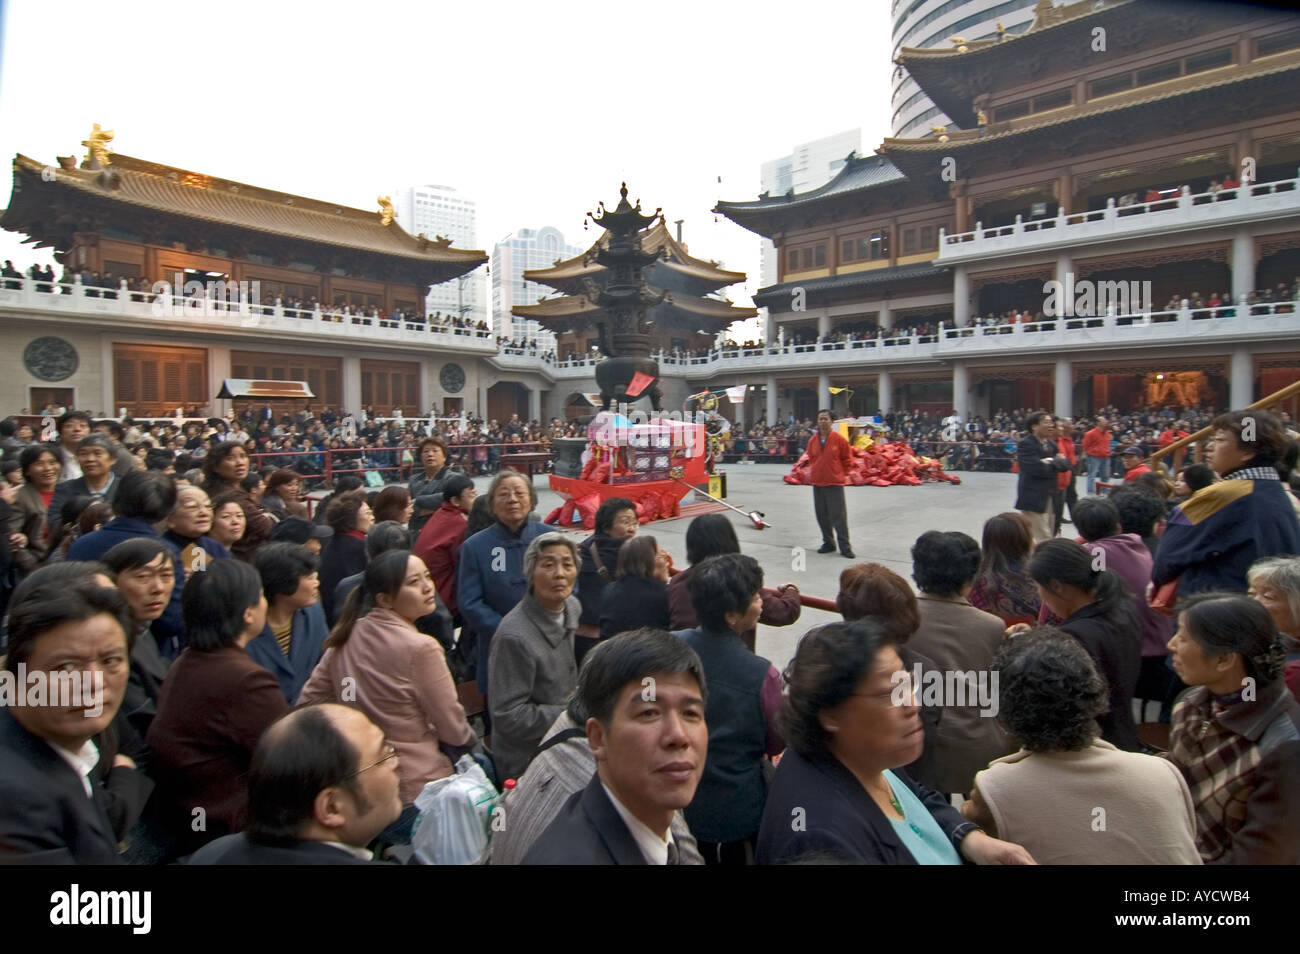 Crowd waiting for a Buddhist religious procession at Jingan Temple, in Shanghai, China. Stock Photo